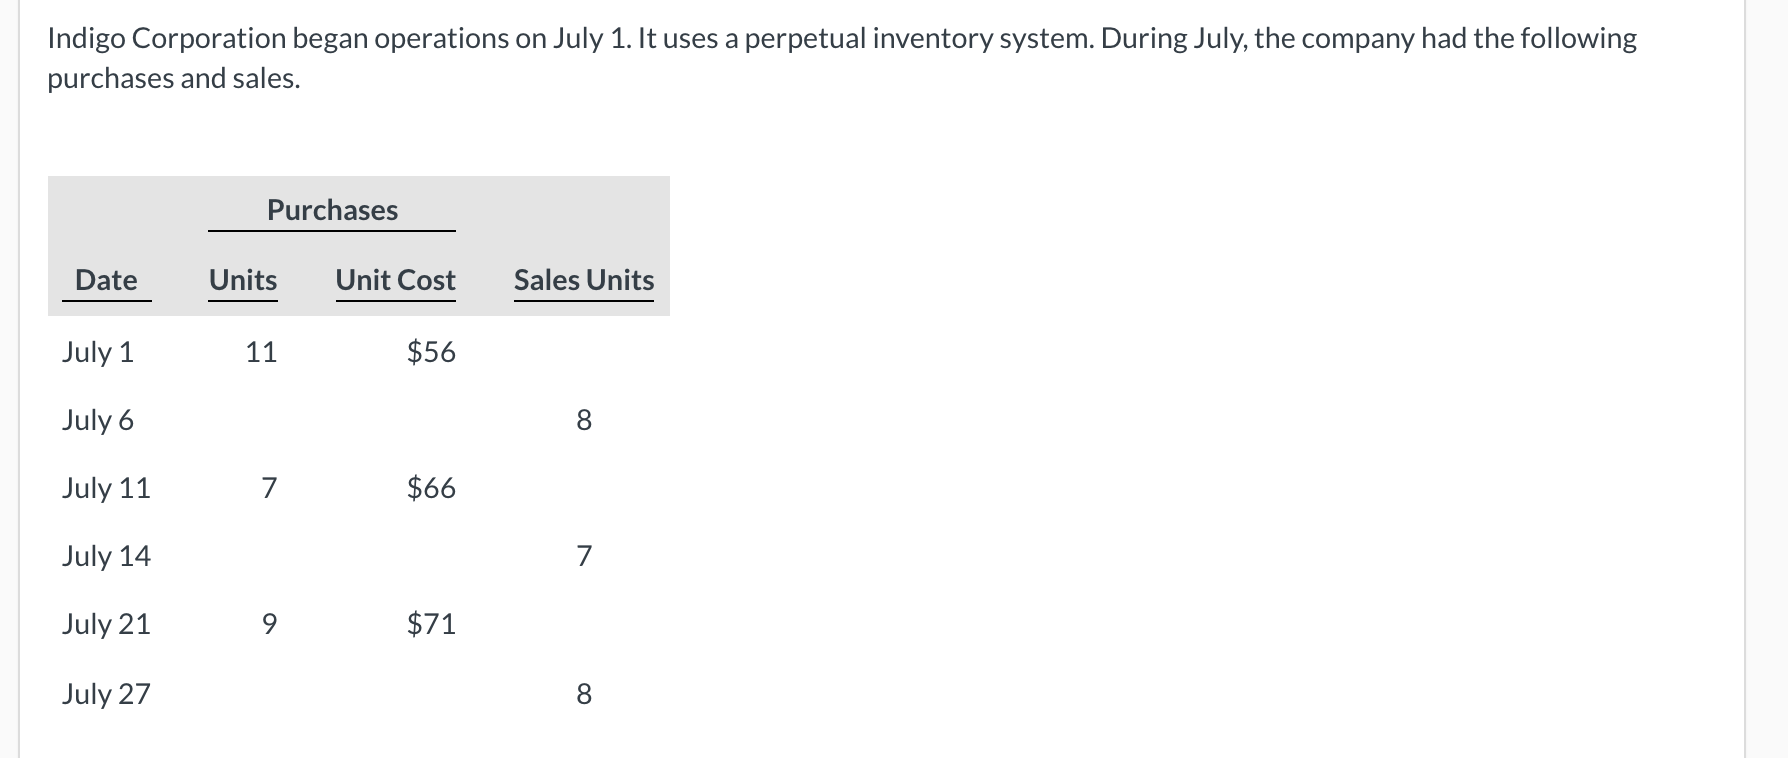 Indigo Corporation began operations on July 1. It uses a perpetual inventory system. During July, the company had the followi